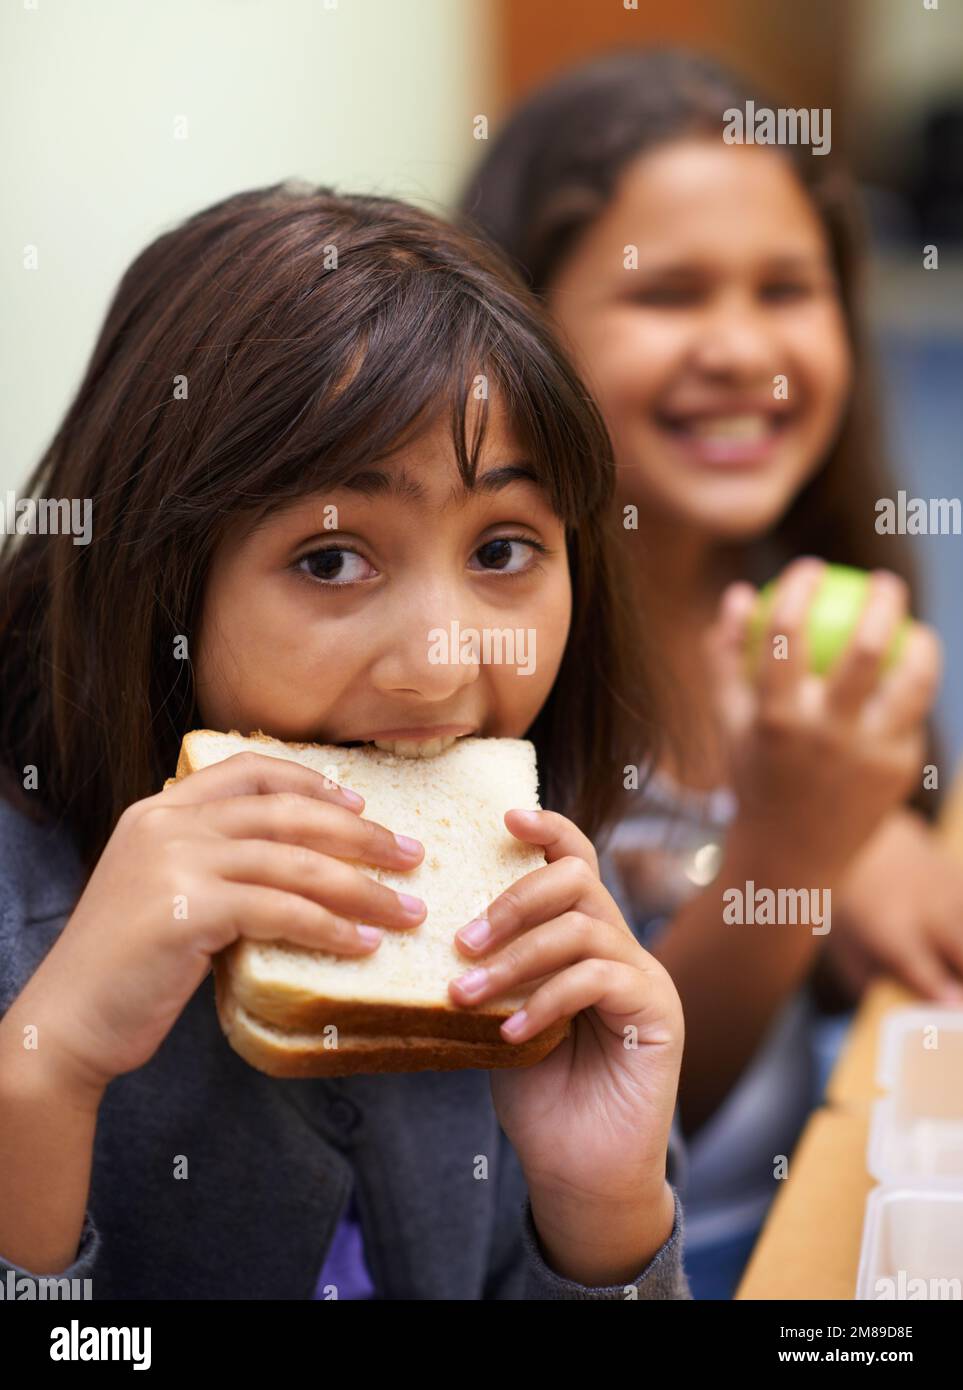 Eating the sandwich my mother made for me. Portrait of a young school girl eating her sandwich in the cafeteria during lunchtime. Stock Photo